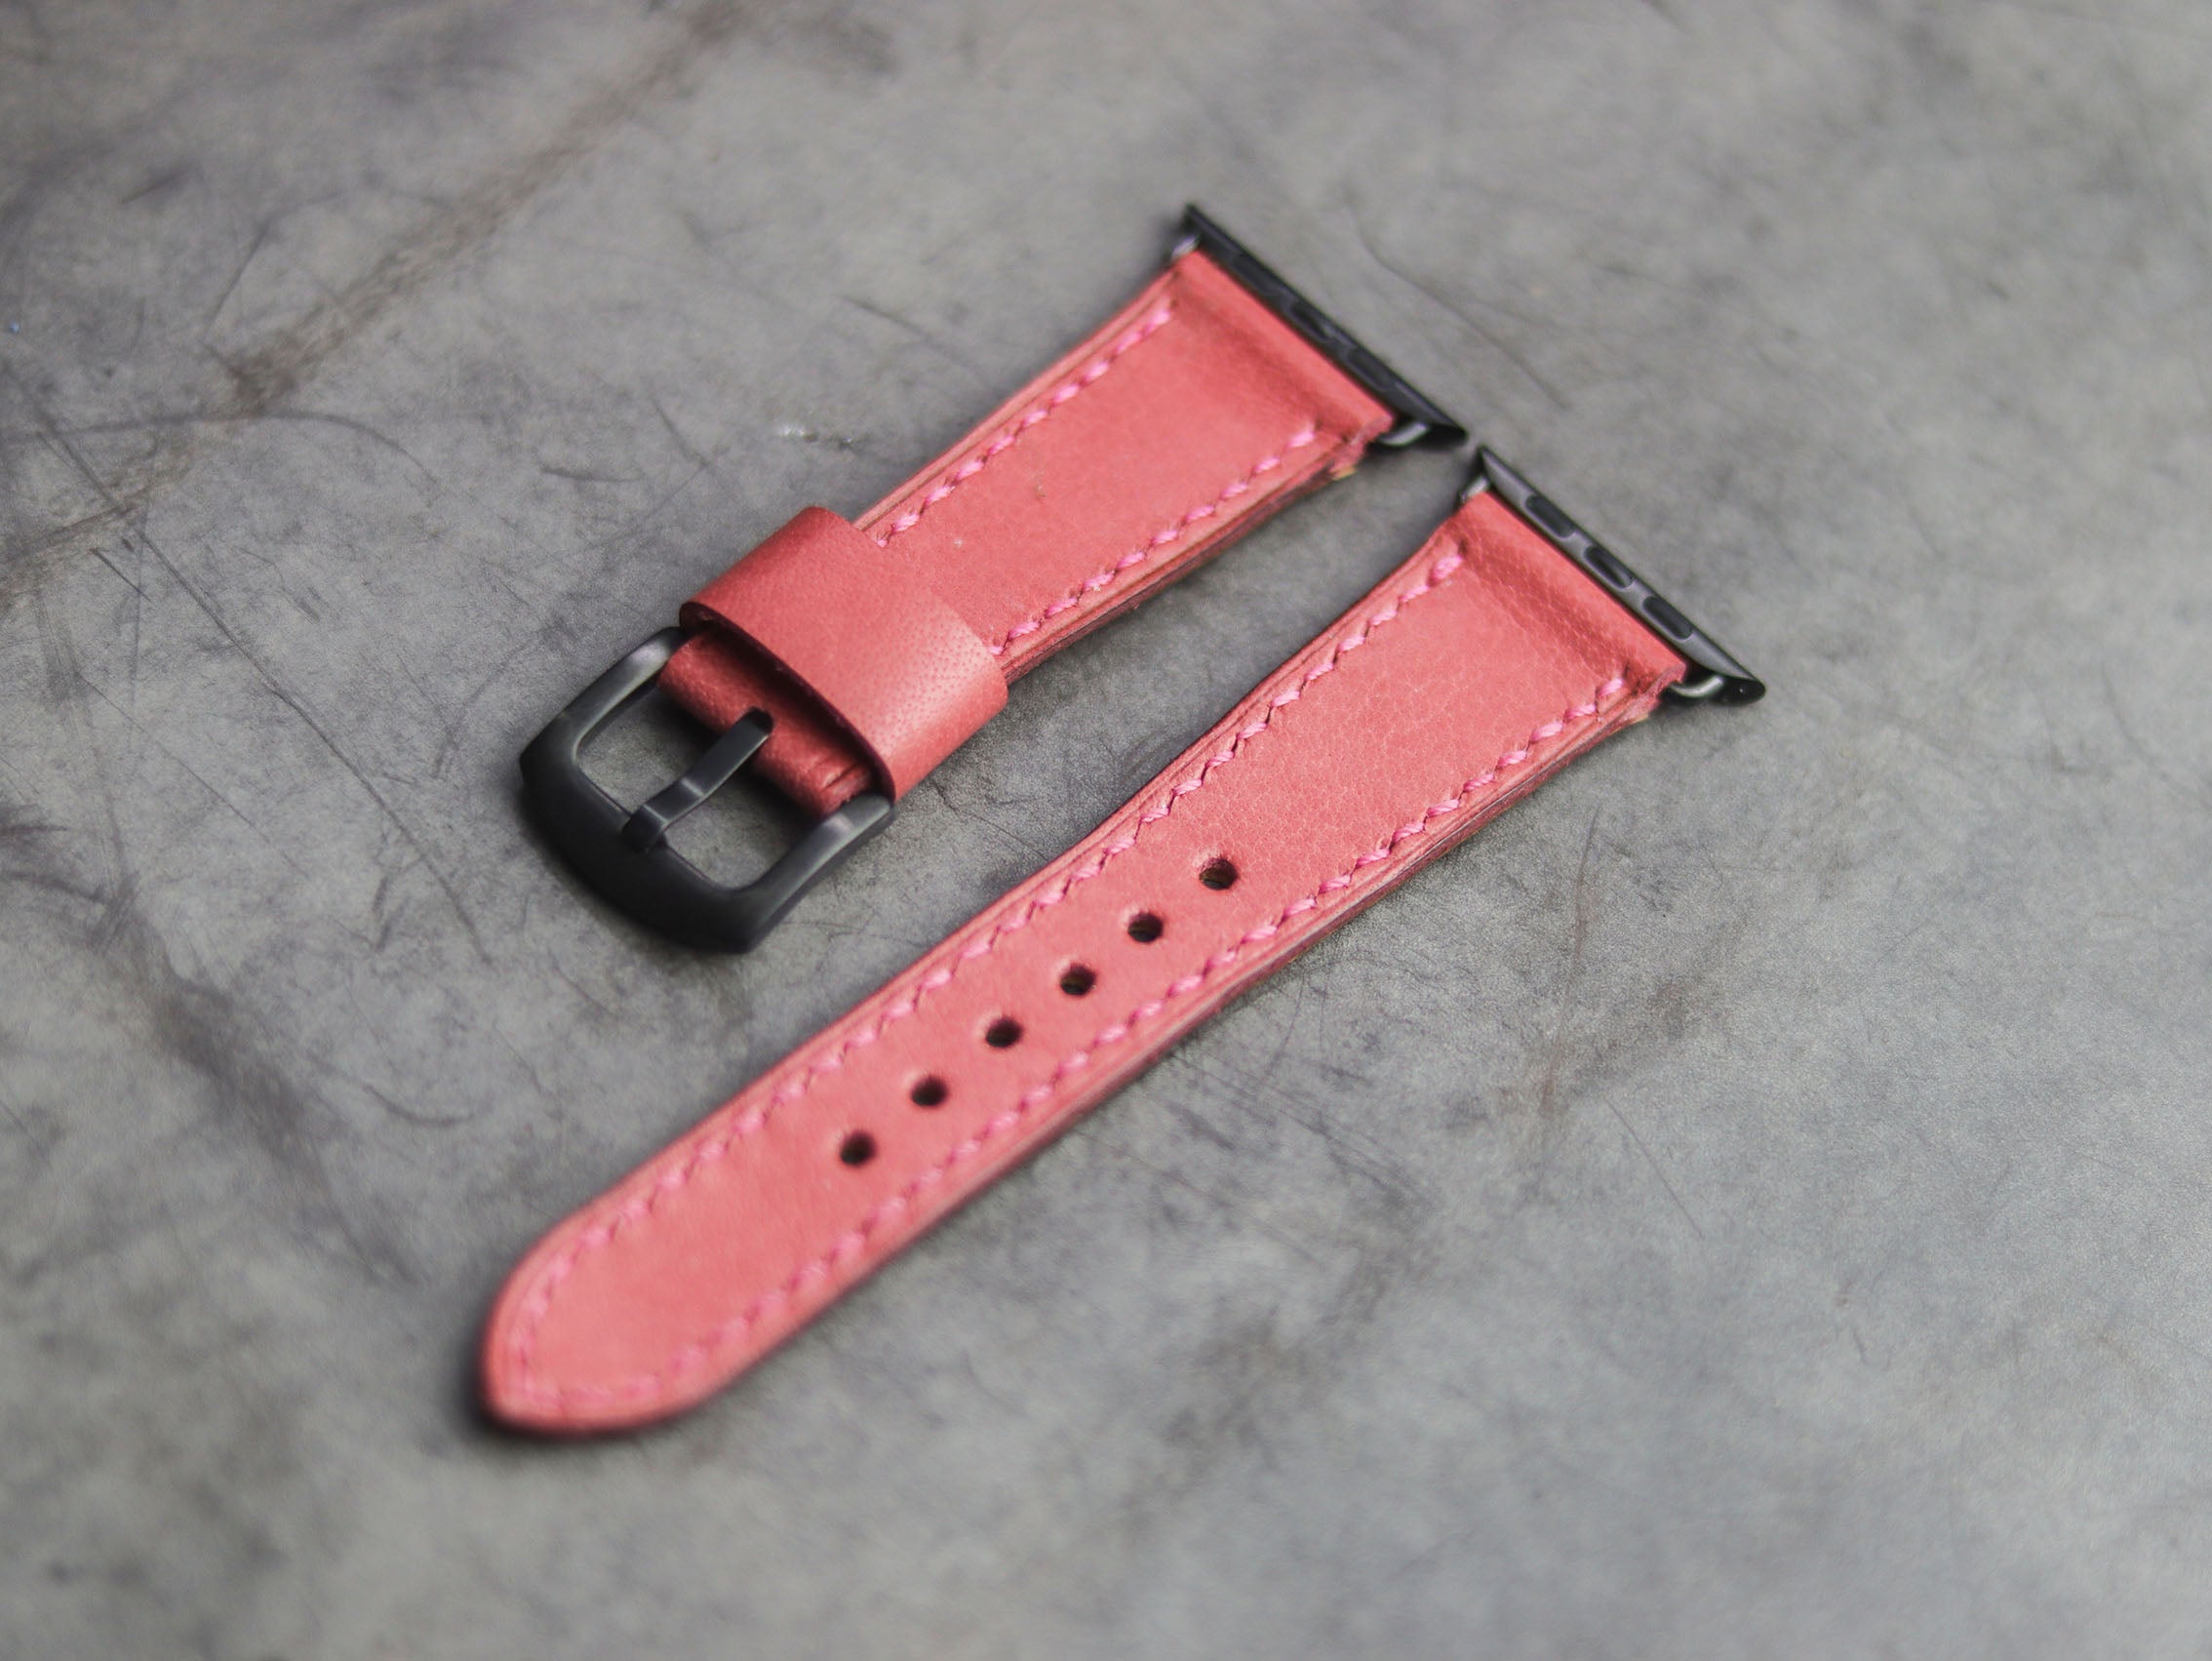 FLAMINGO PINK FULL STITCHED HAND-CRAFTED APPLE WATCH STRAPS